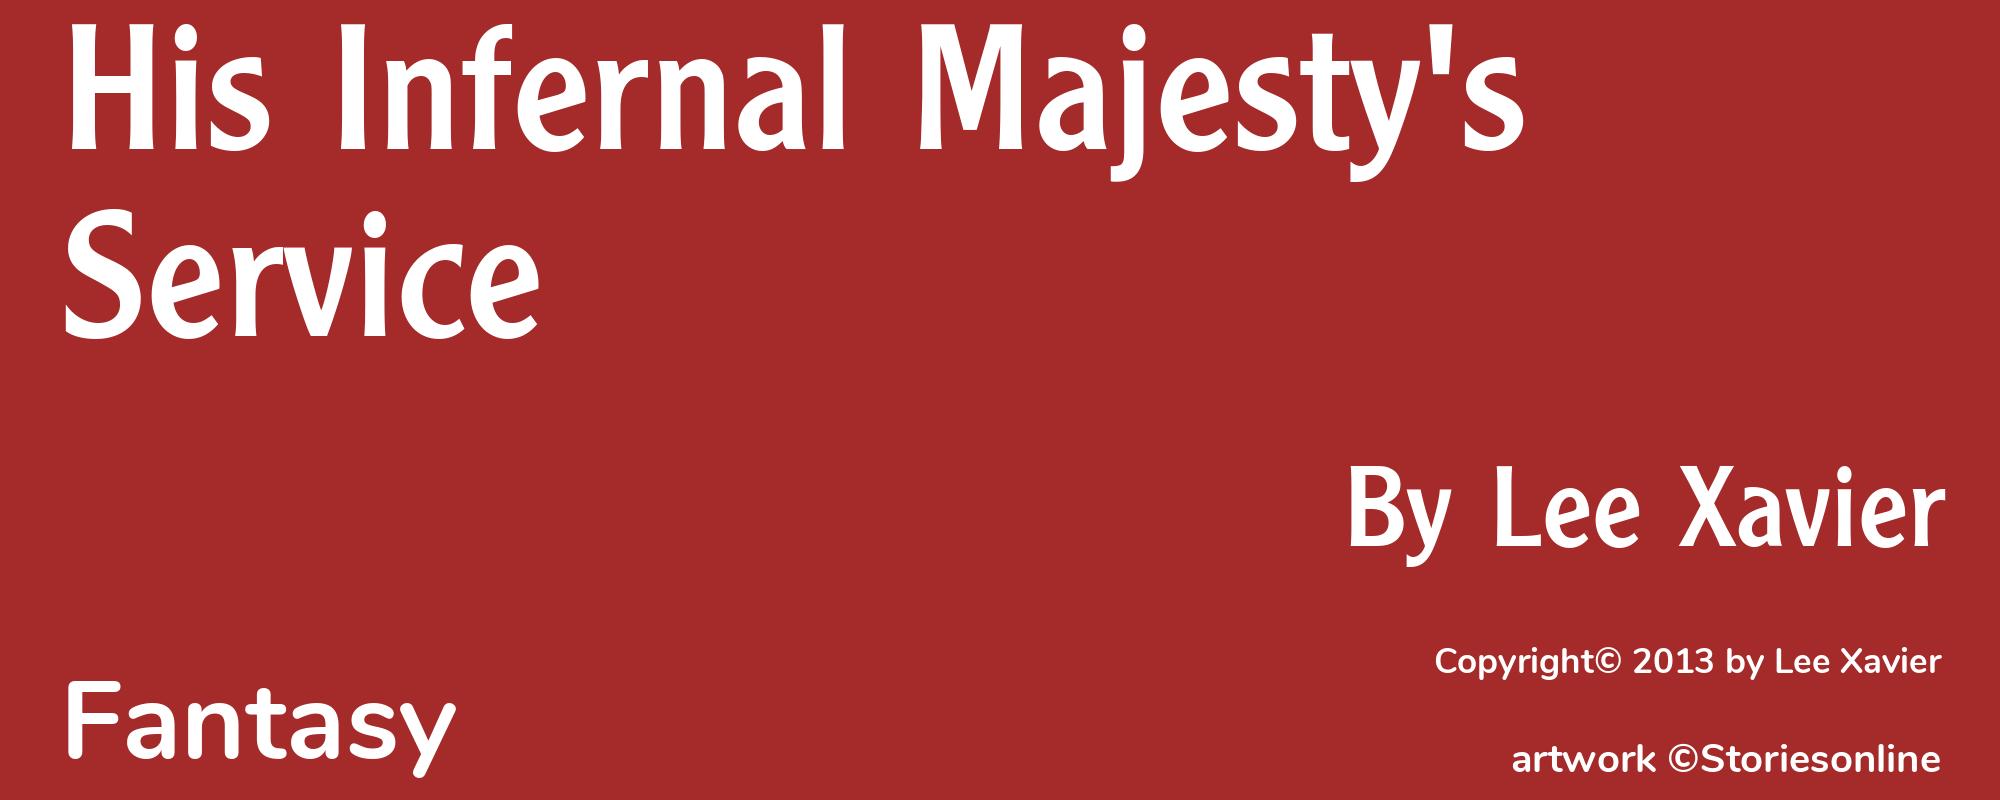 His Infernal Majesty's Service - Cover